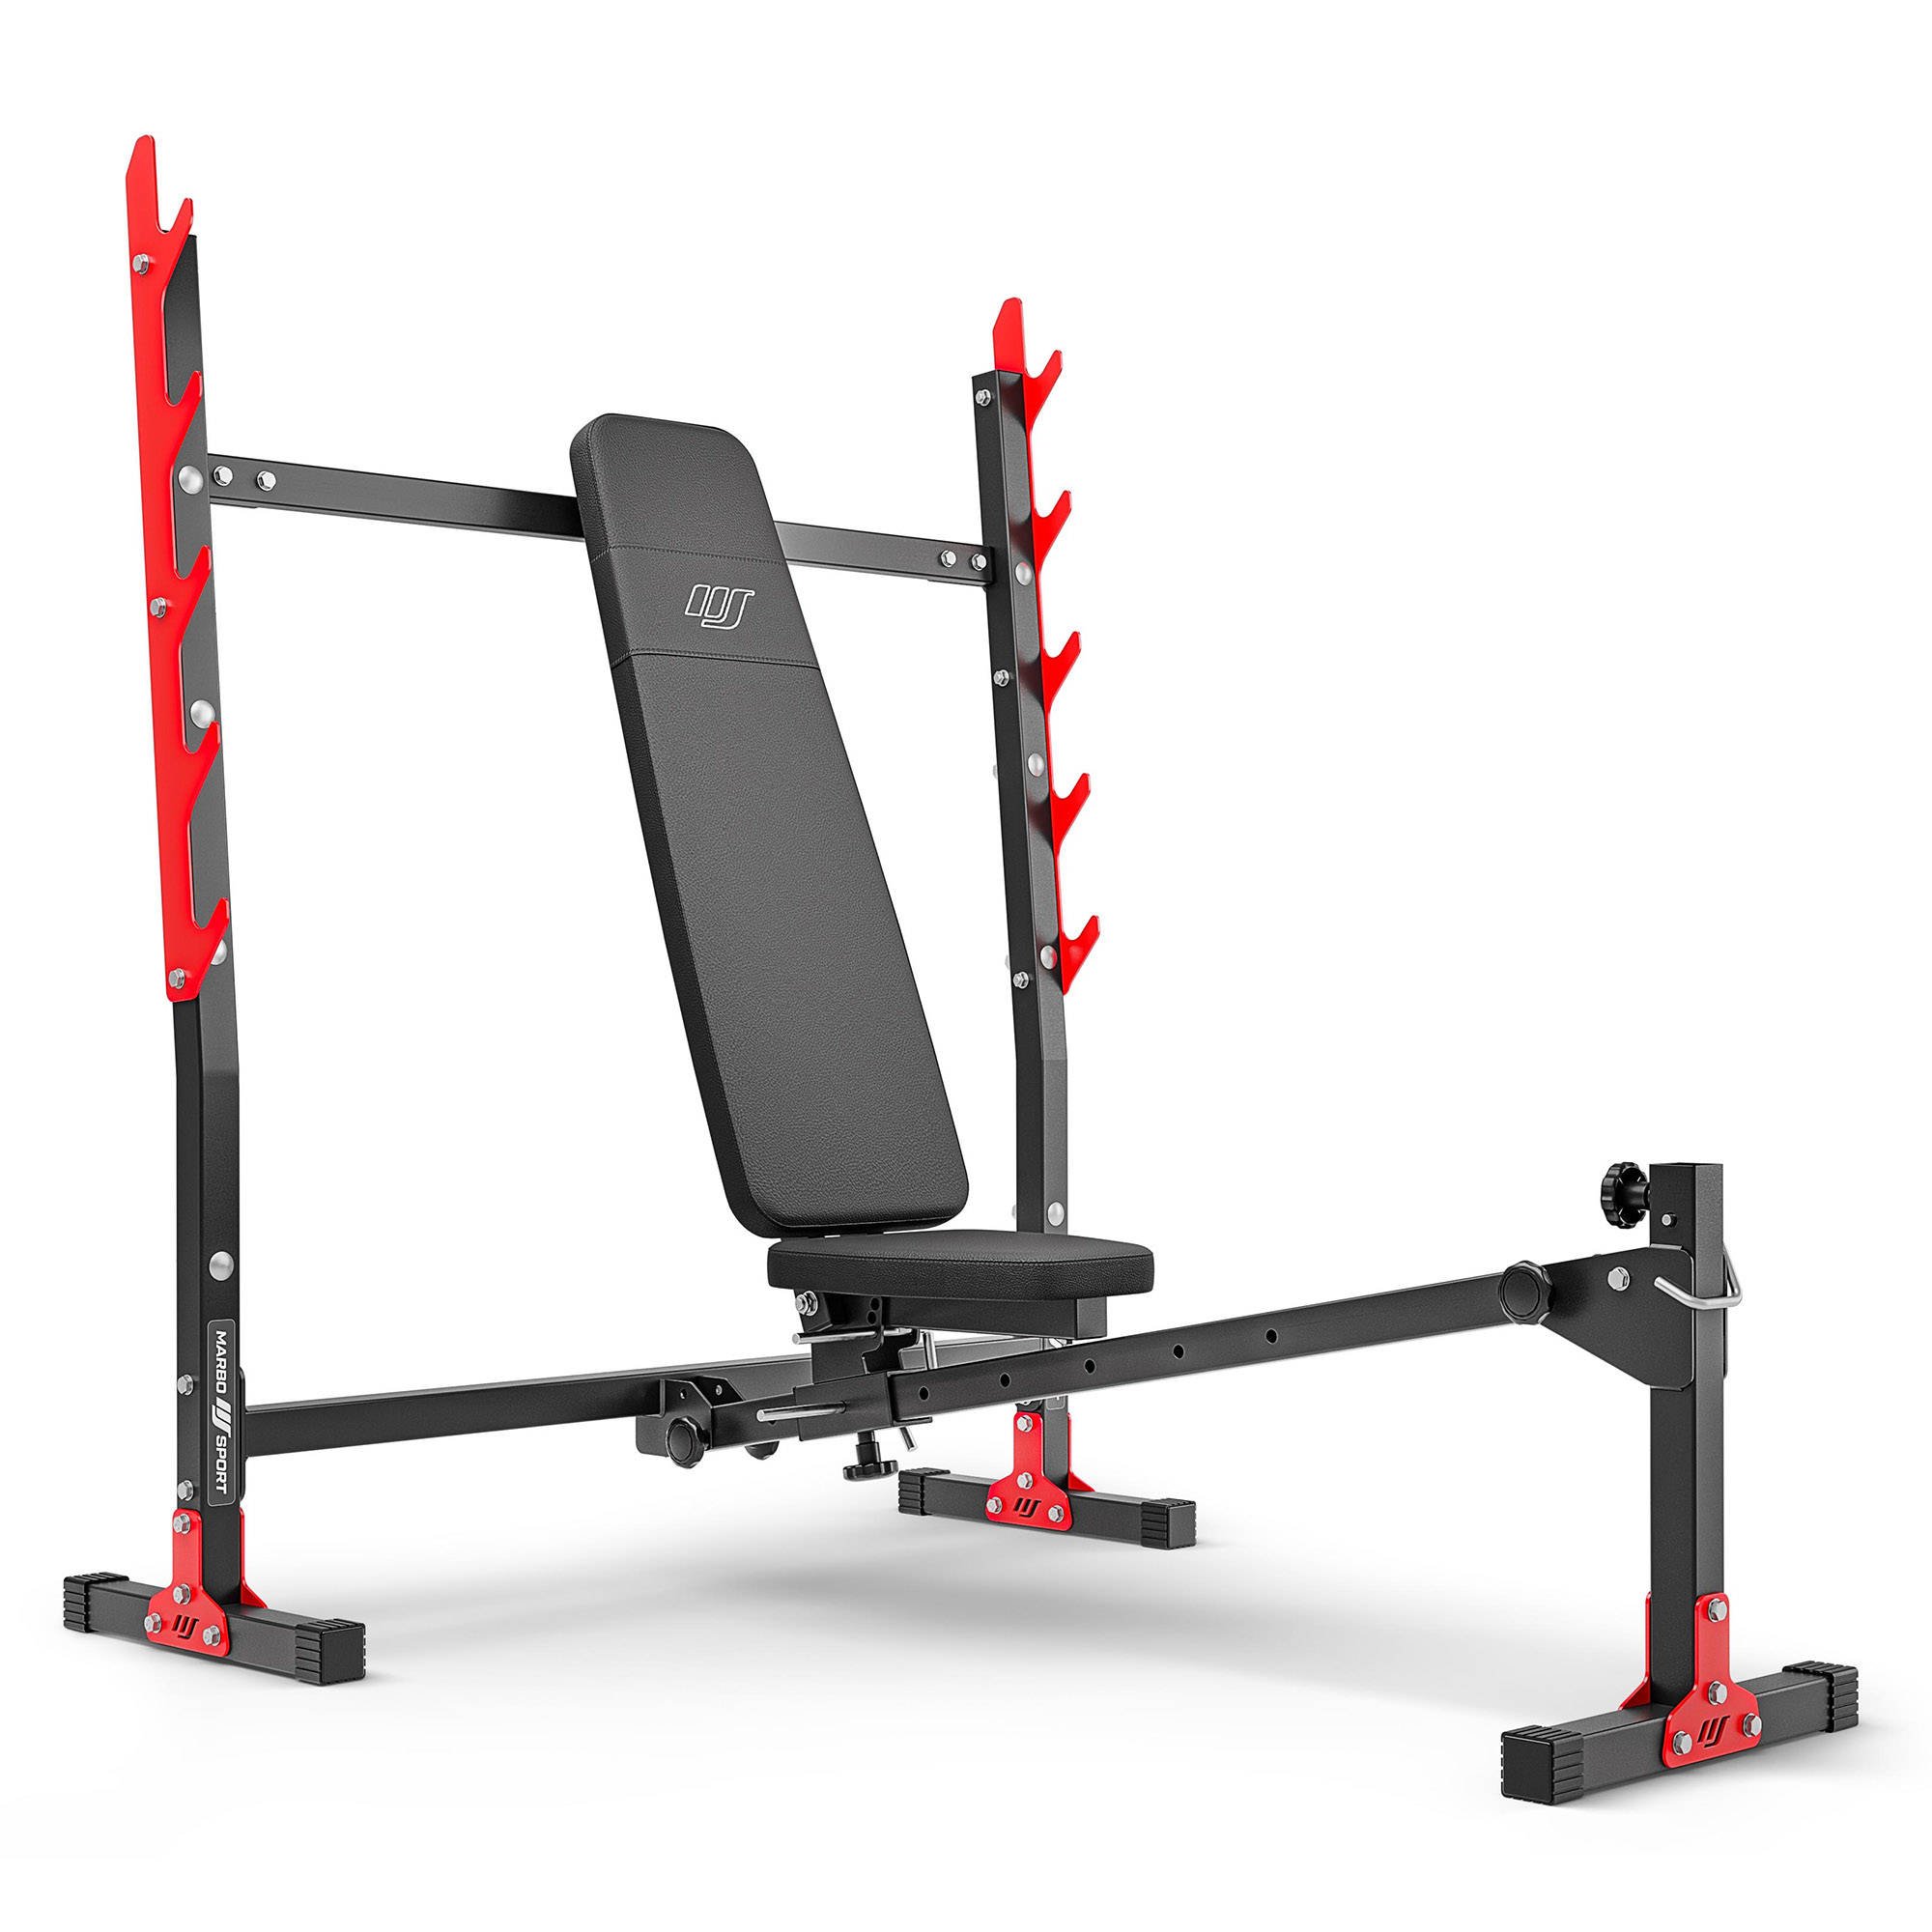 Bench 2.0 – Marbo Sport 107 2.0 | equipment \ Training benches \ Barbell benches For beginners | MarboSport.eu